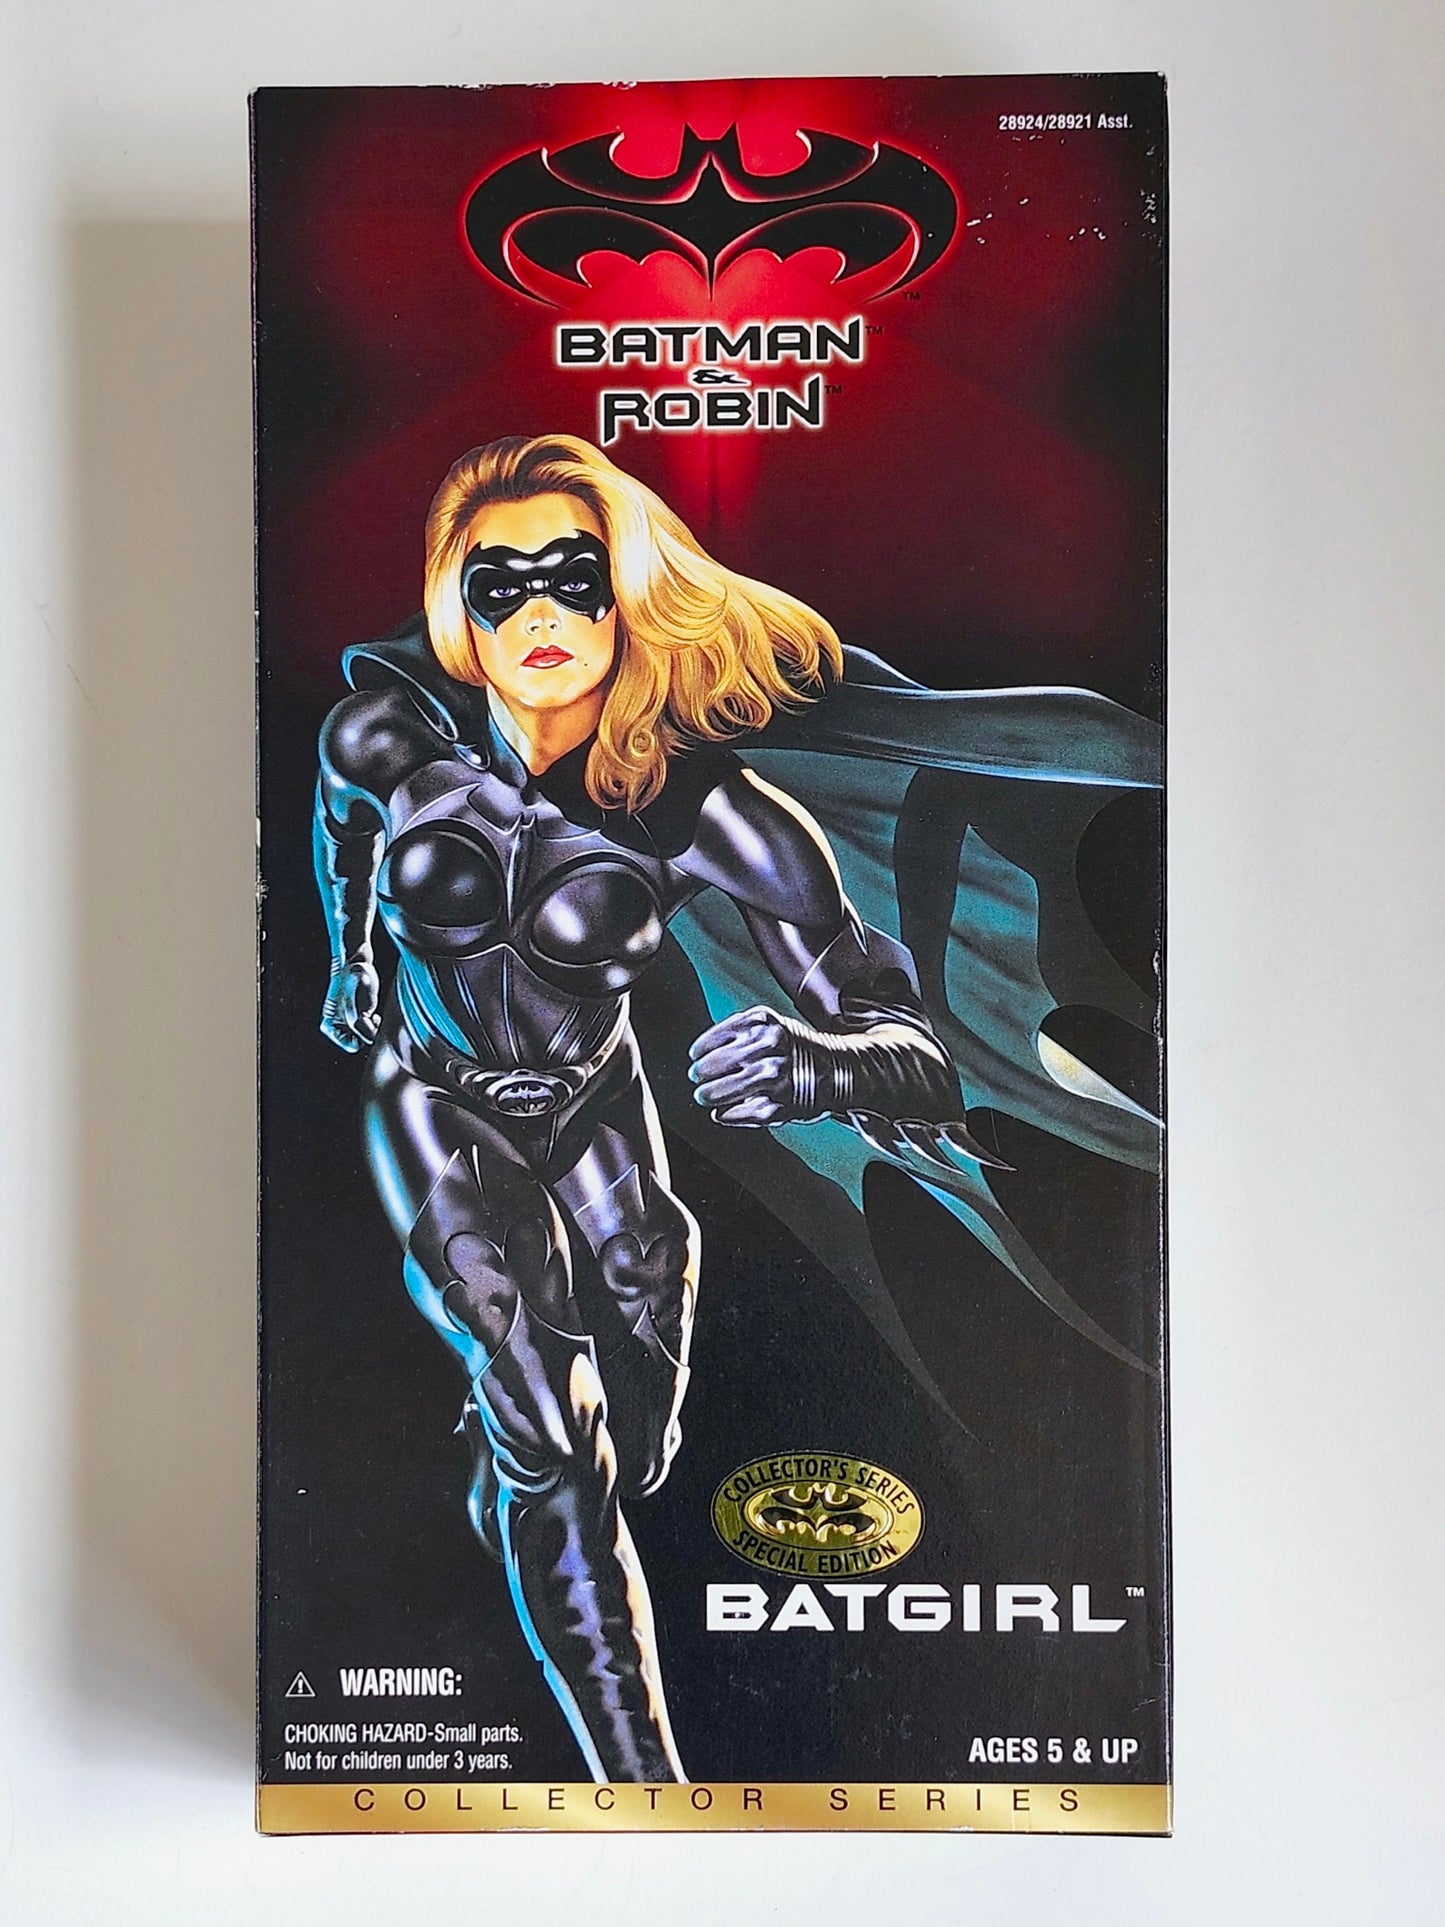 Collector Series Batgirl 12-Inch Action Figure from Batman & Robin